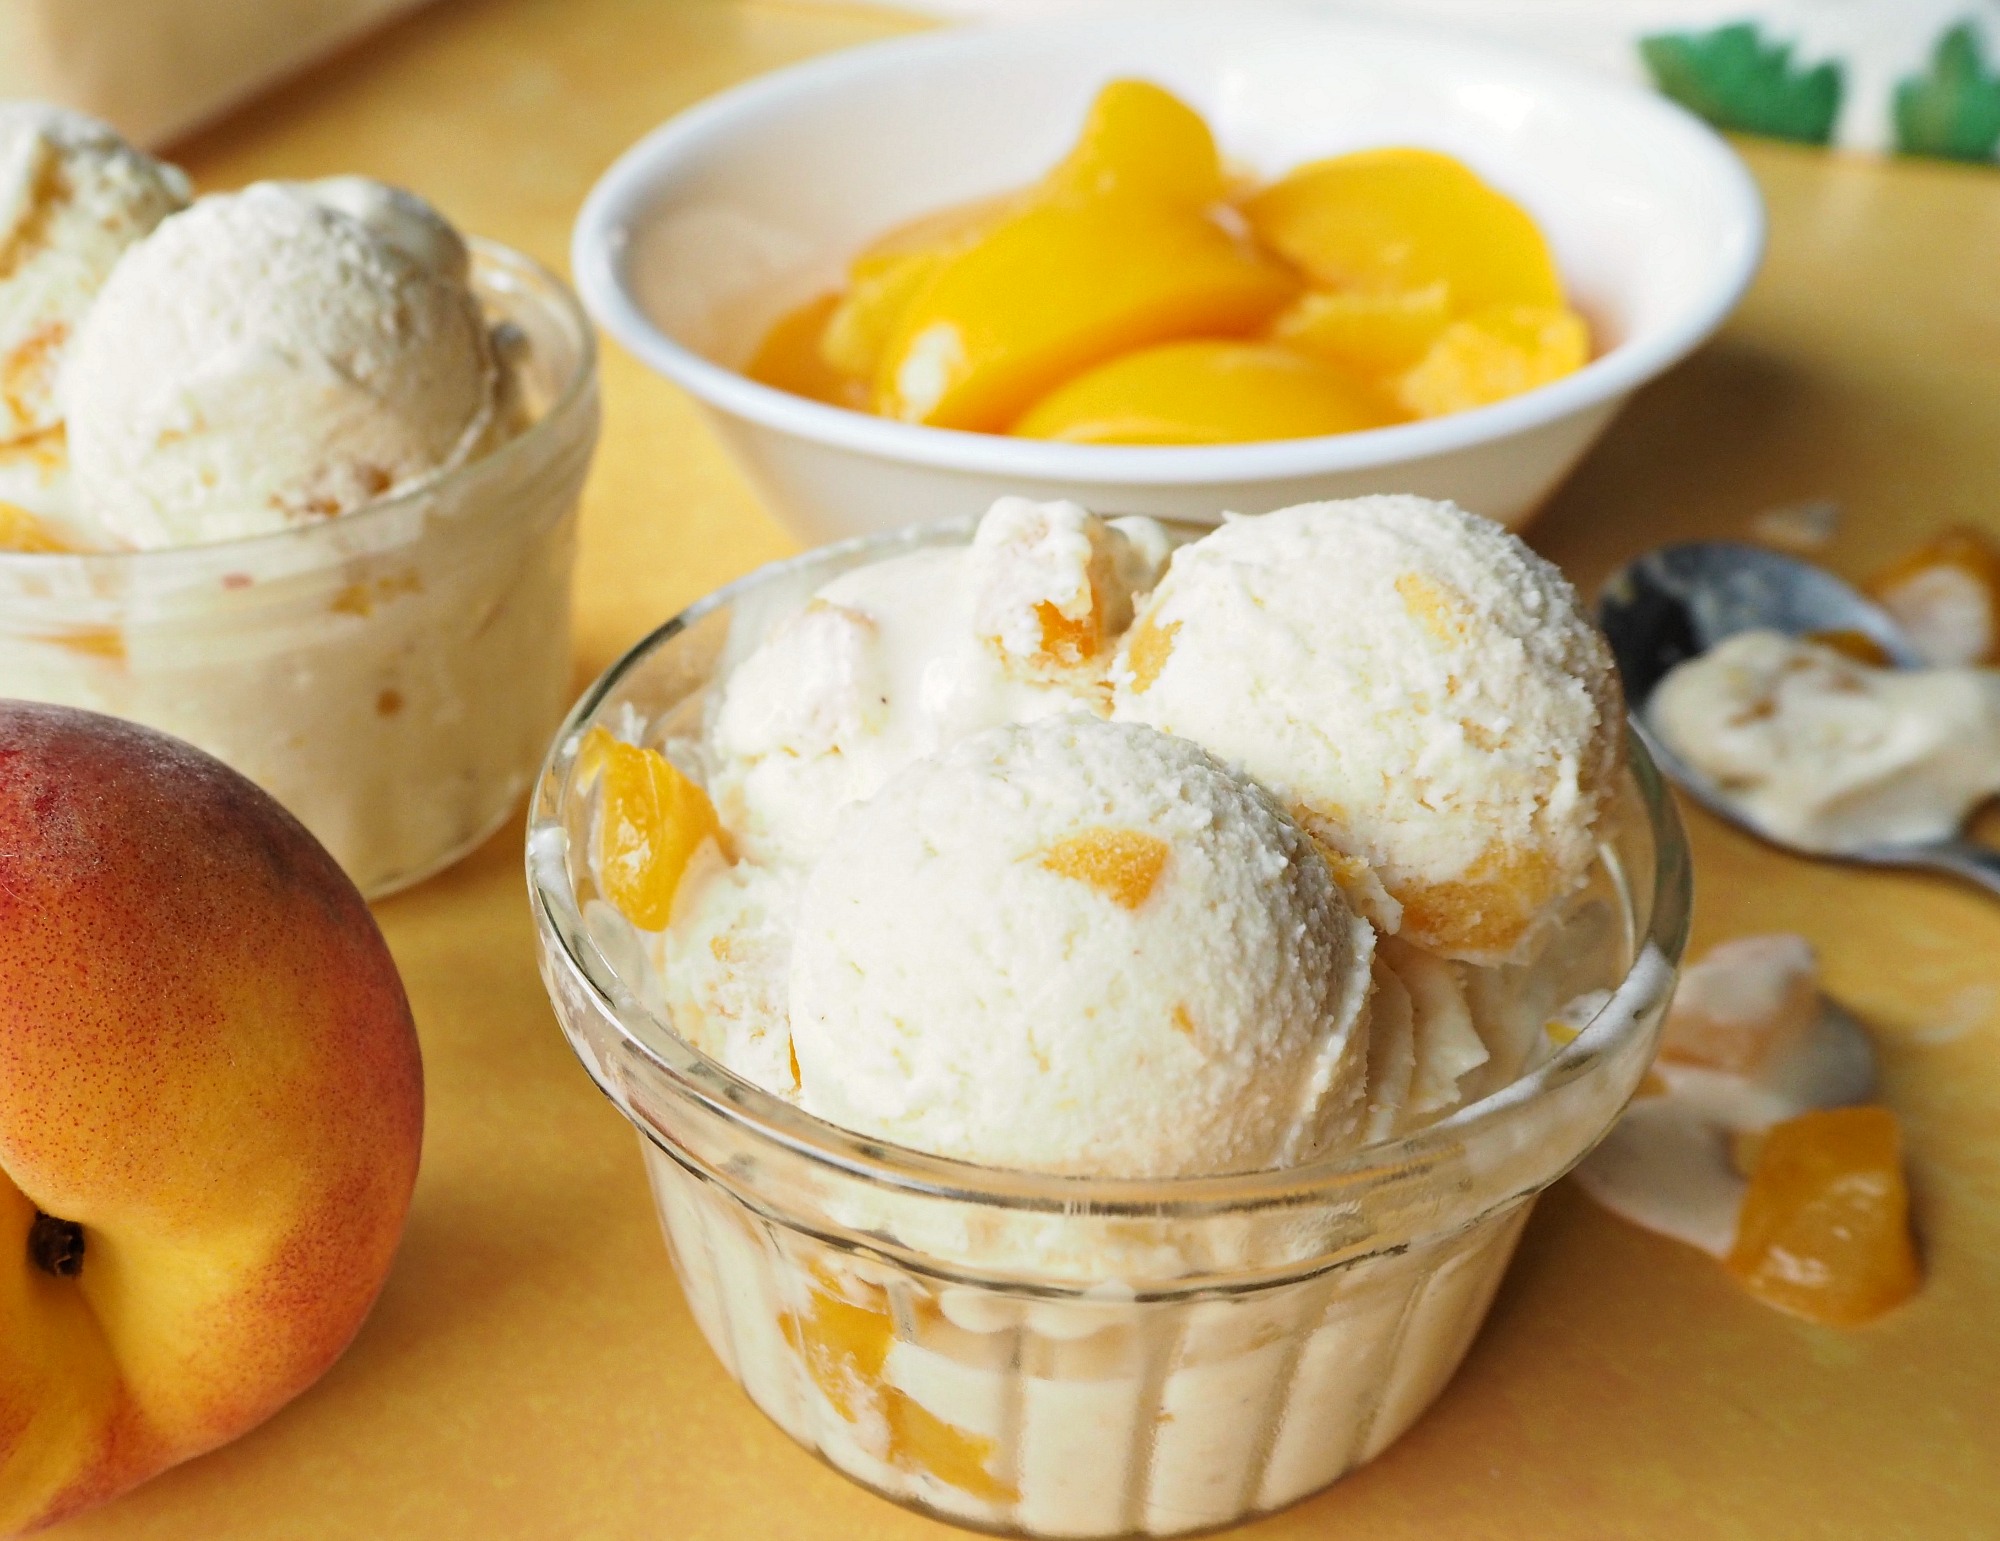 Bowls of peach ice cream next to a bowl of sliced peaches.